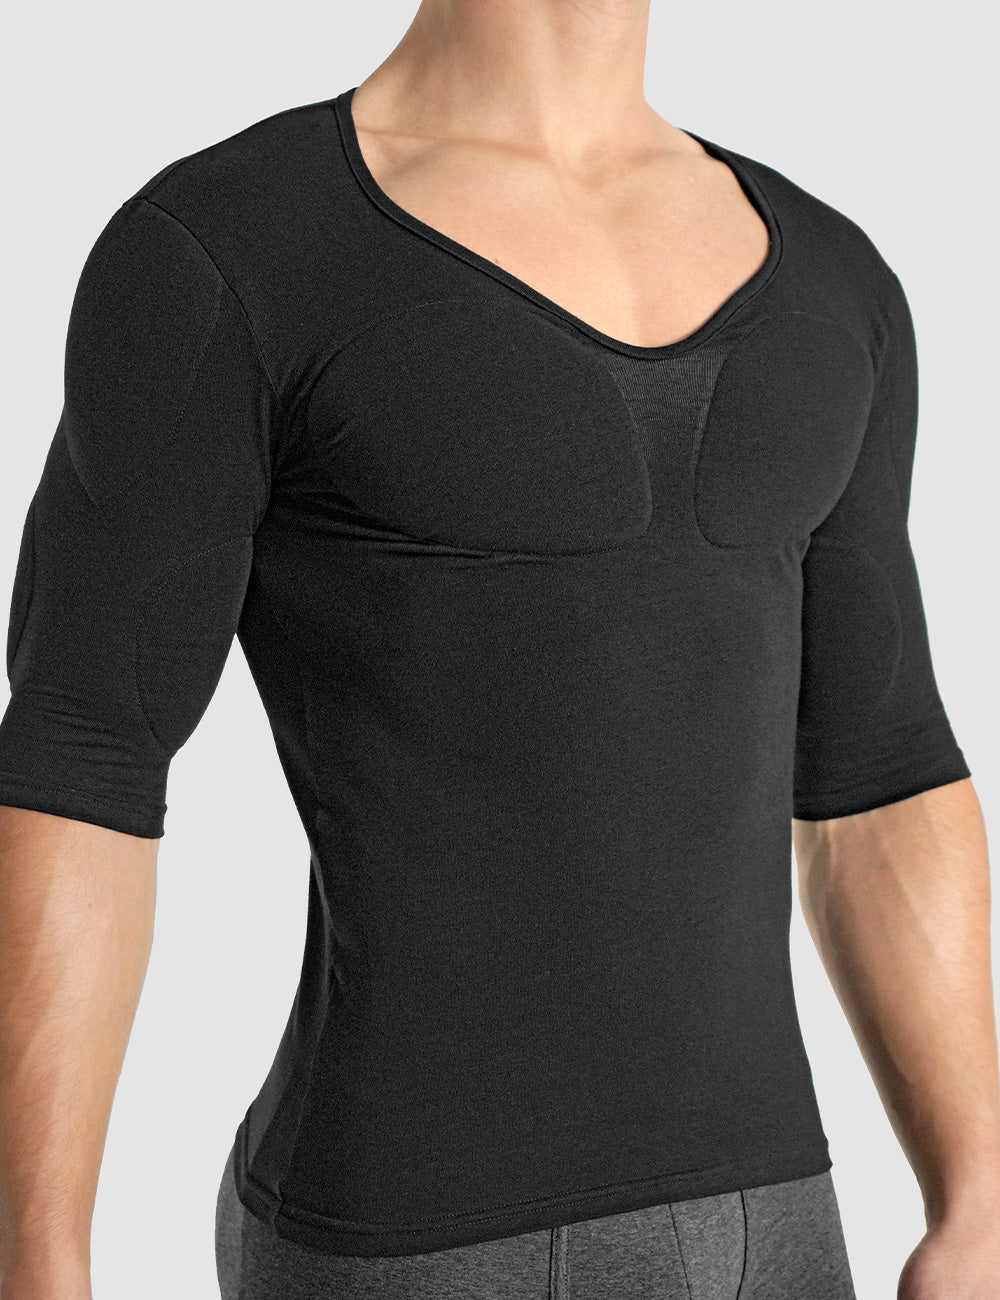 Buy Muscle Padded Shirt online